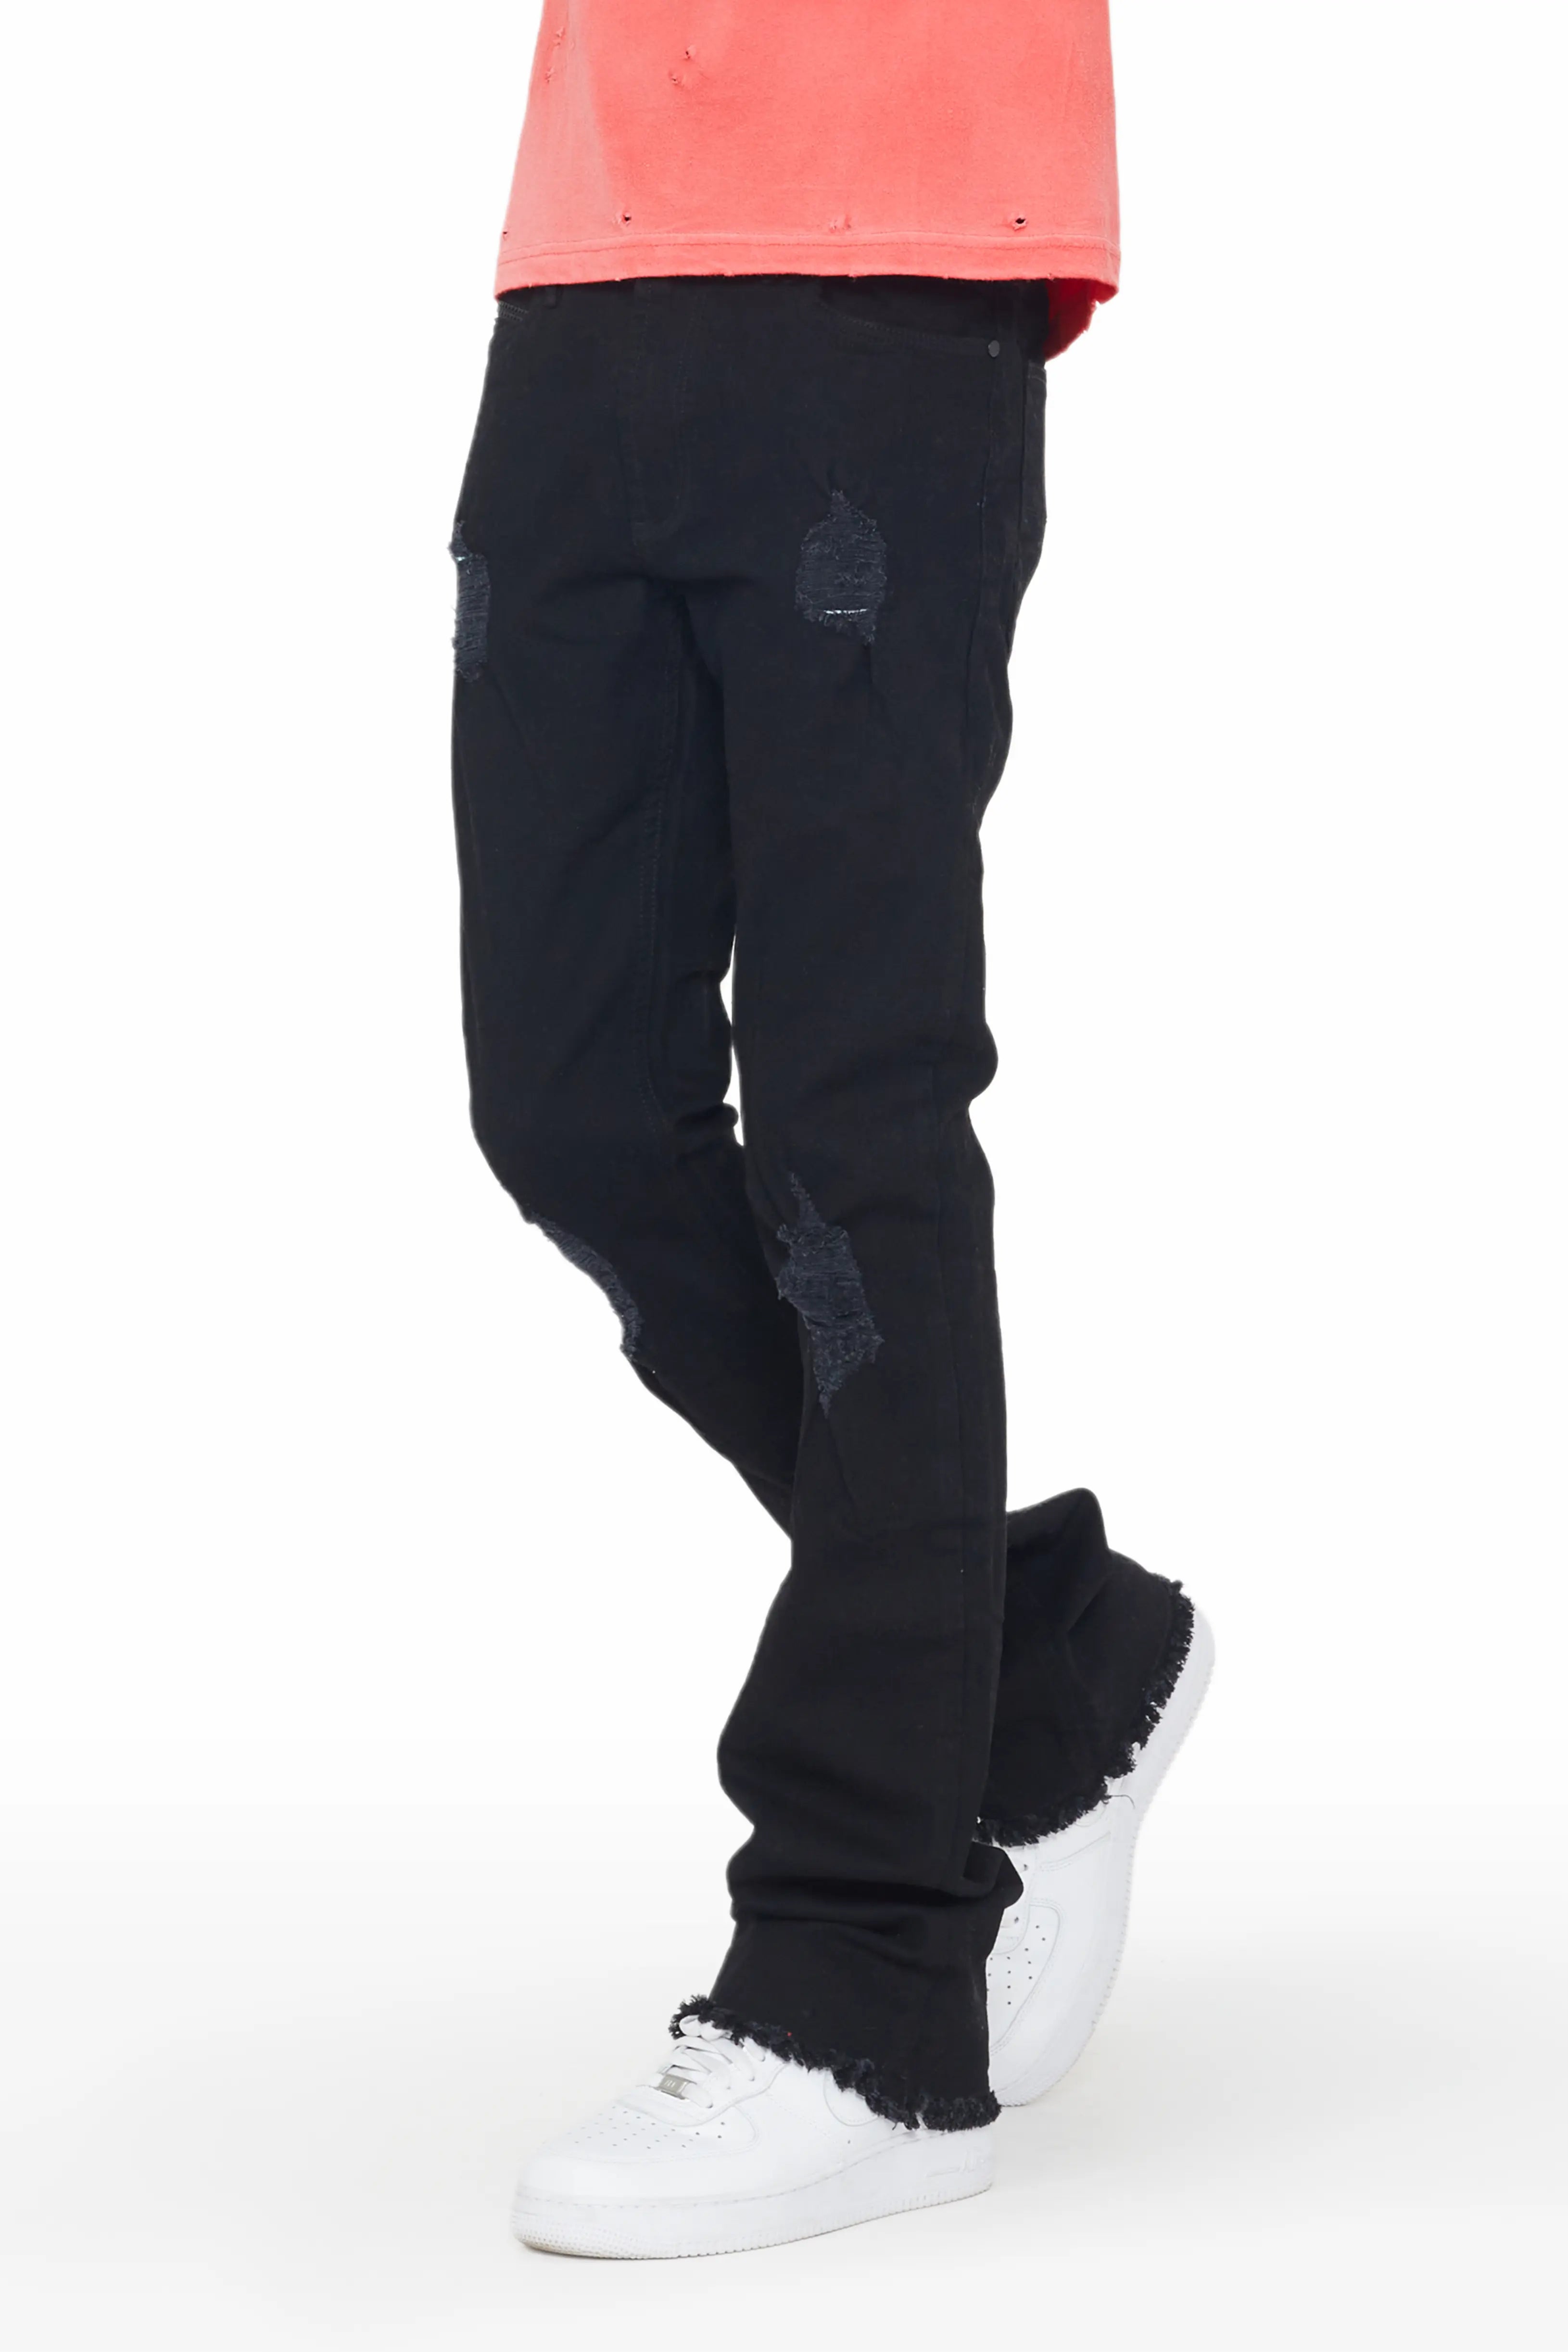 High Street Retro Black Stacked Jeans Mens With Heavy Industry